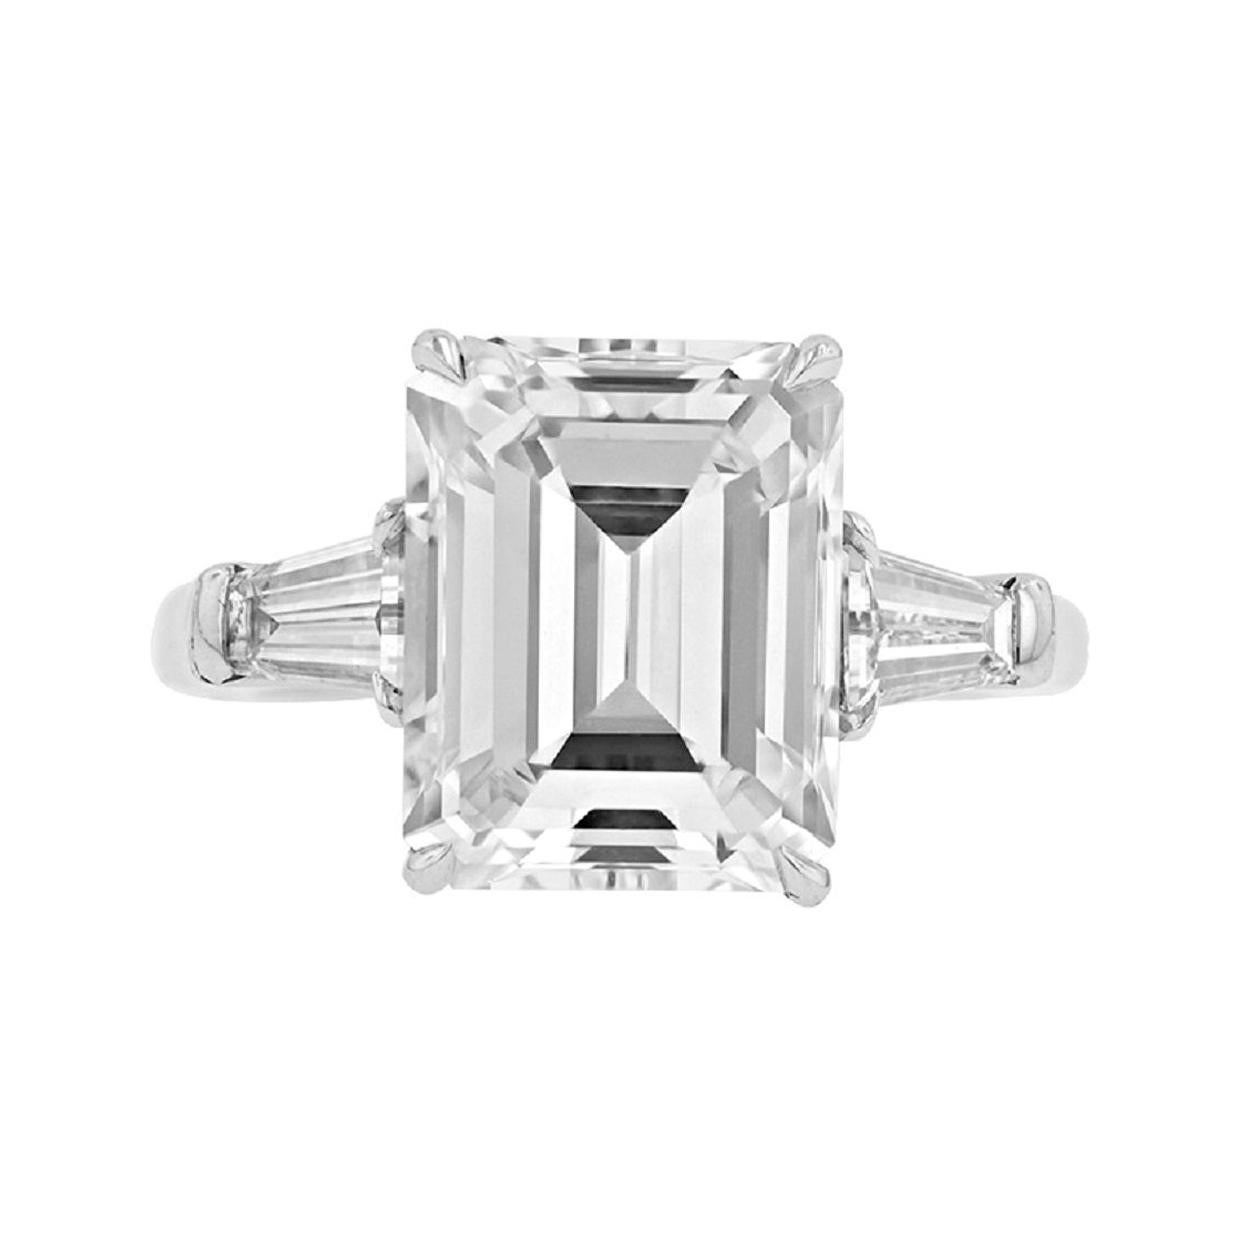 Emerald Cut Diamond Ring with Tapered Baguettes Diamonds For Sale